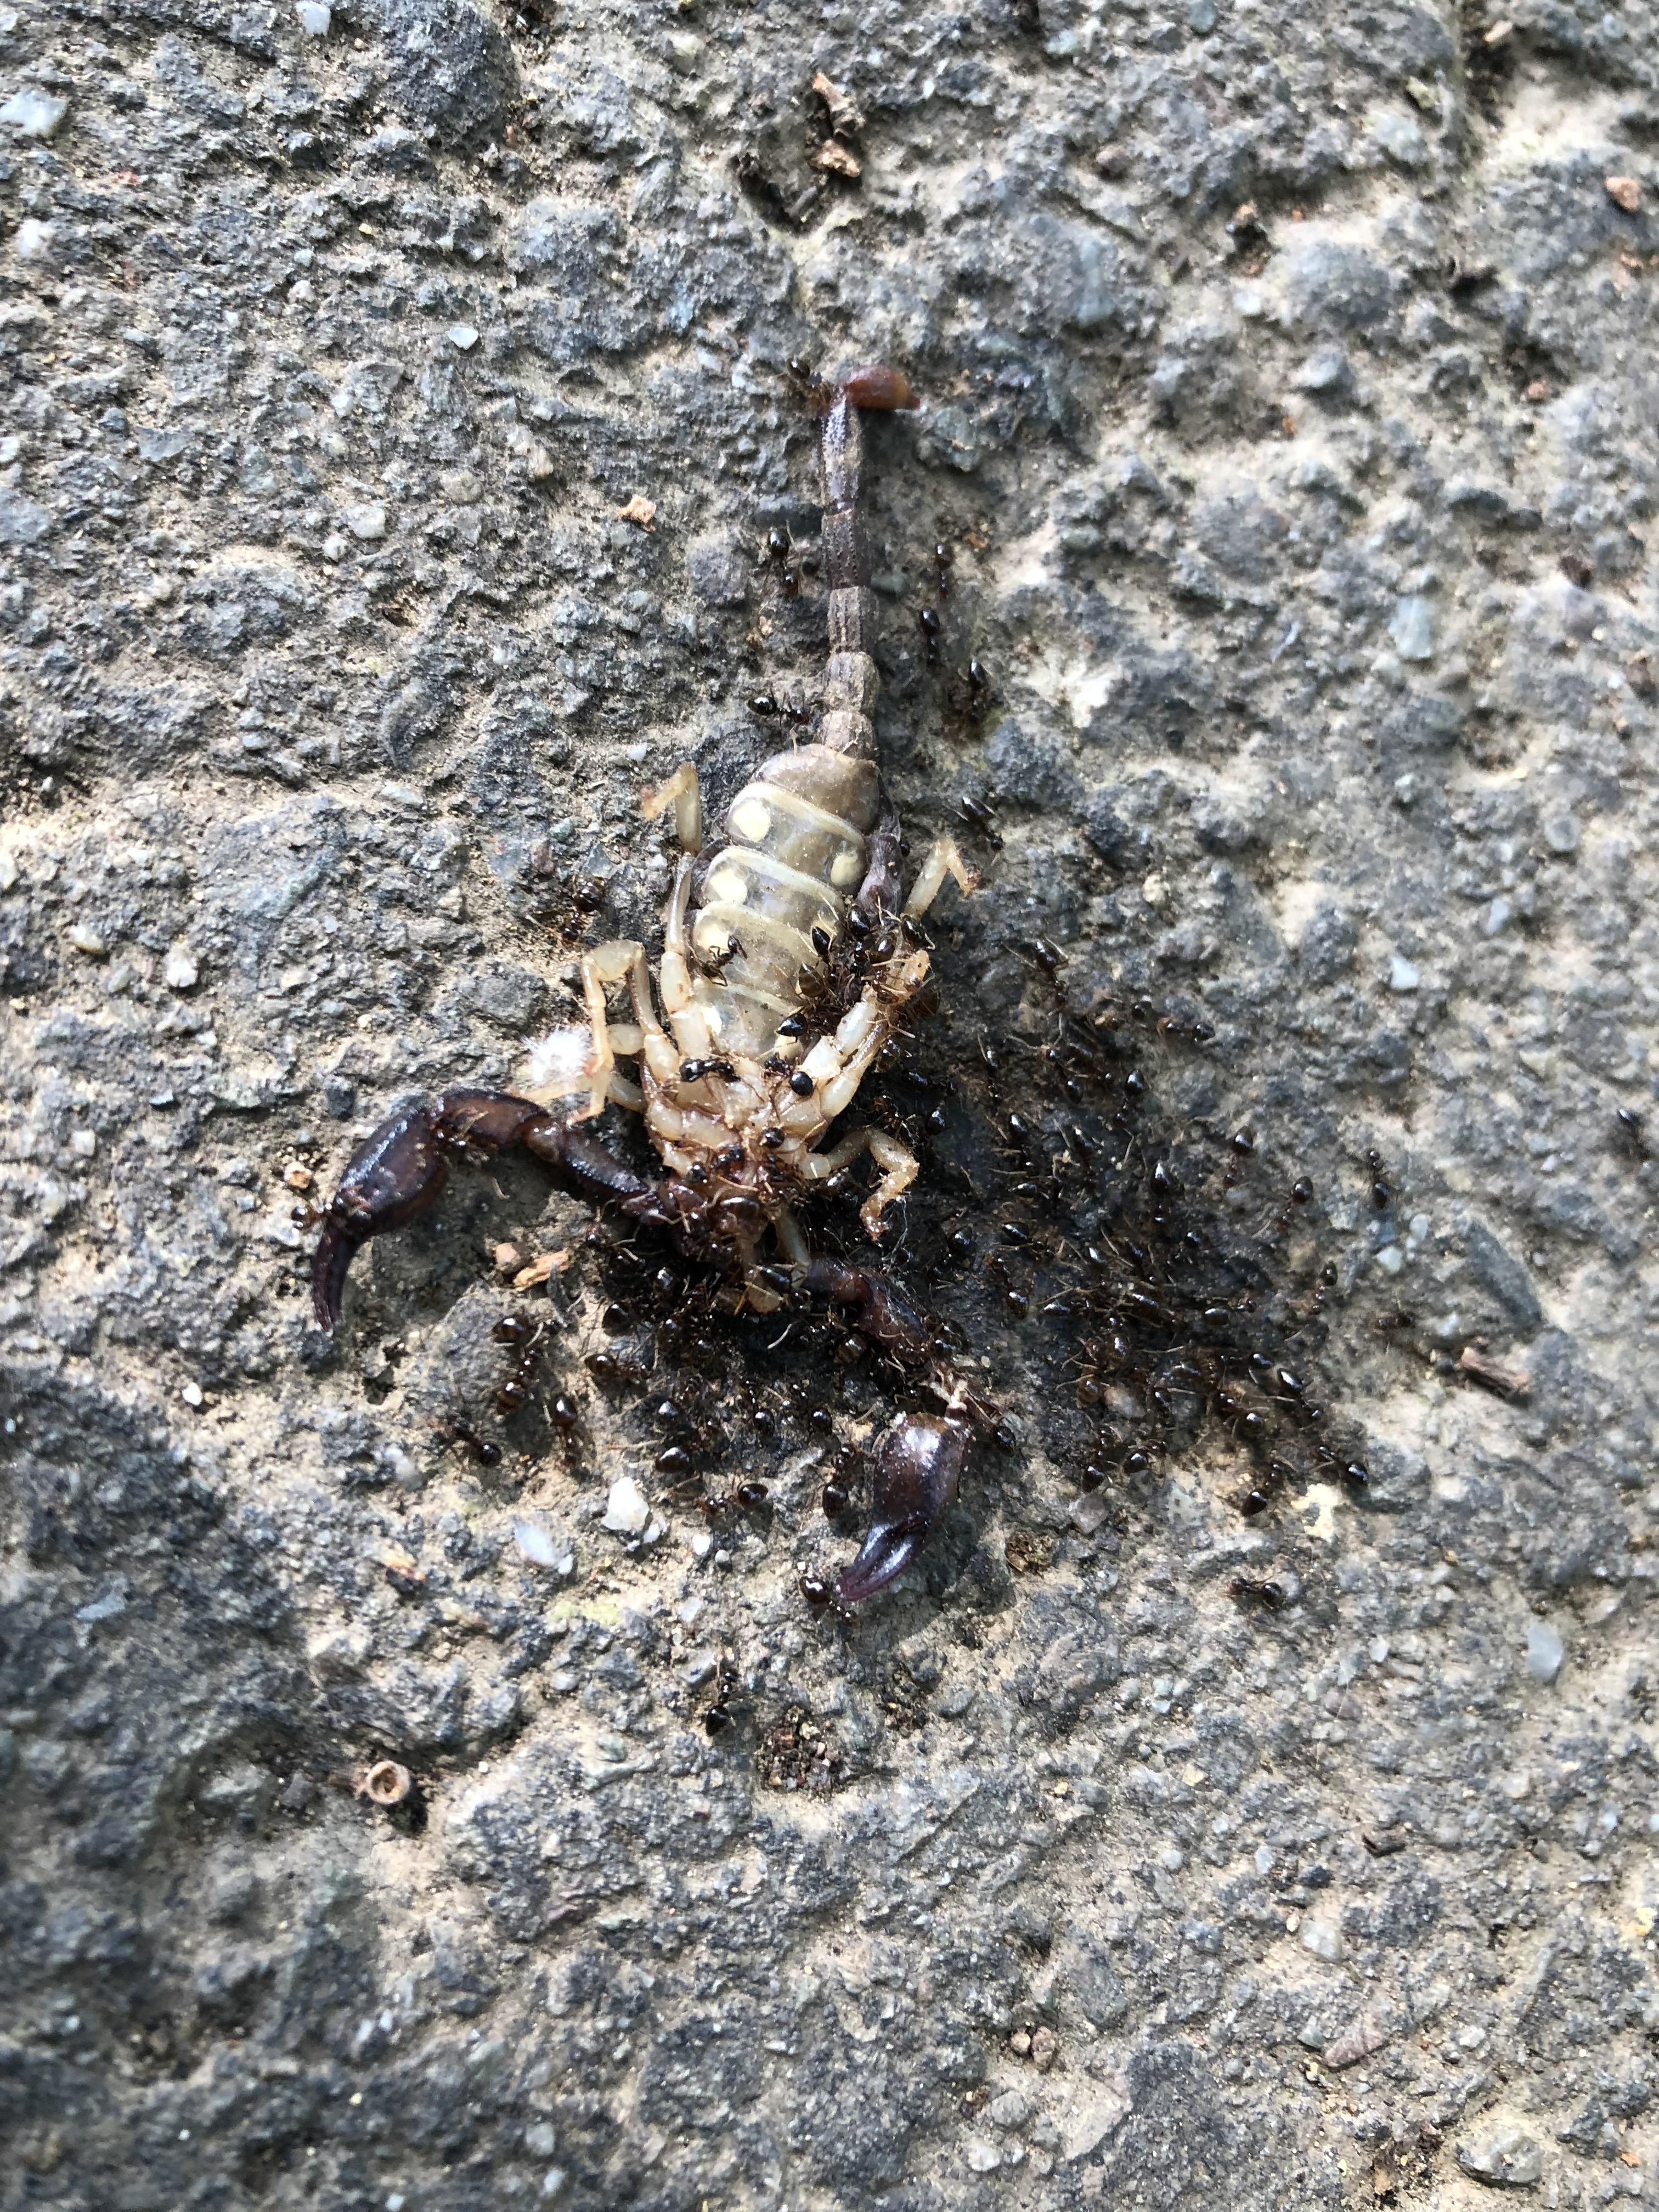 Found some ants feasting on a scorpion today : natureismetal